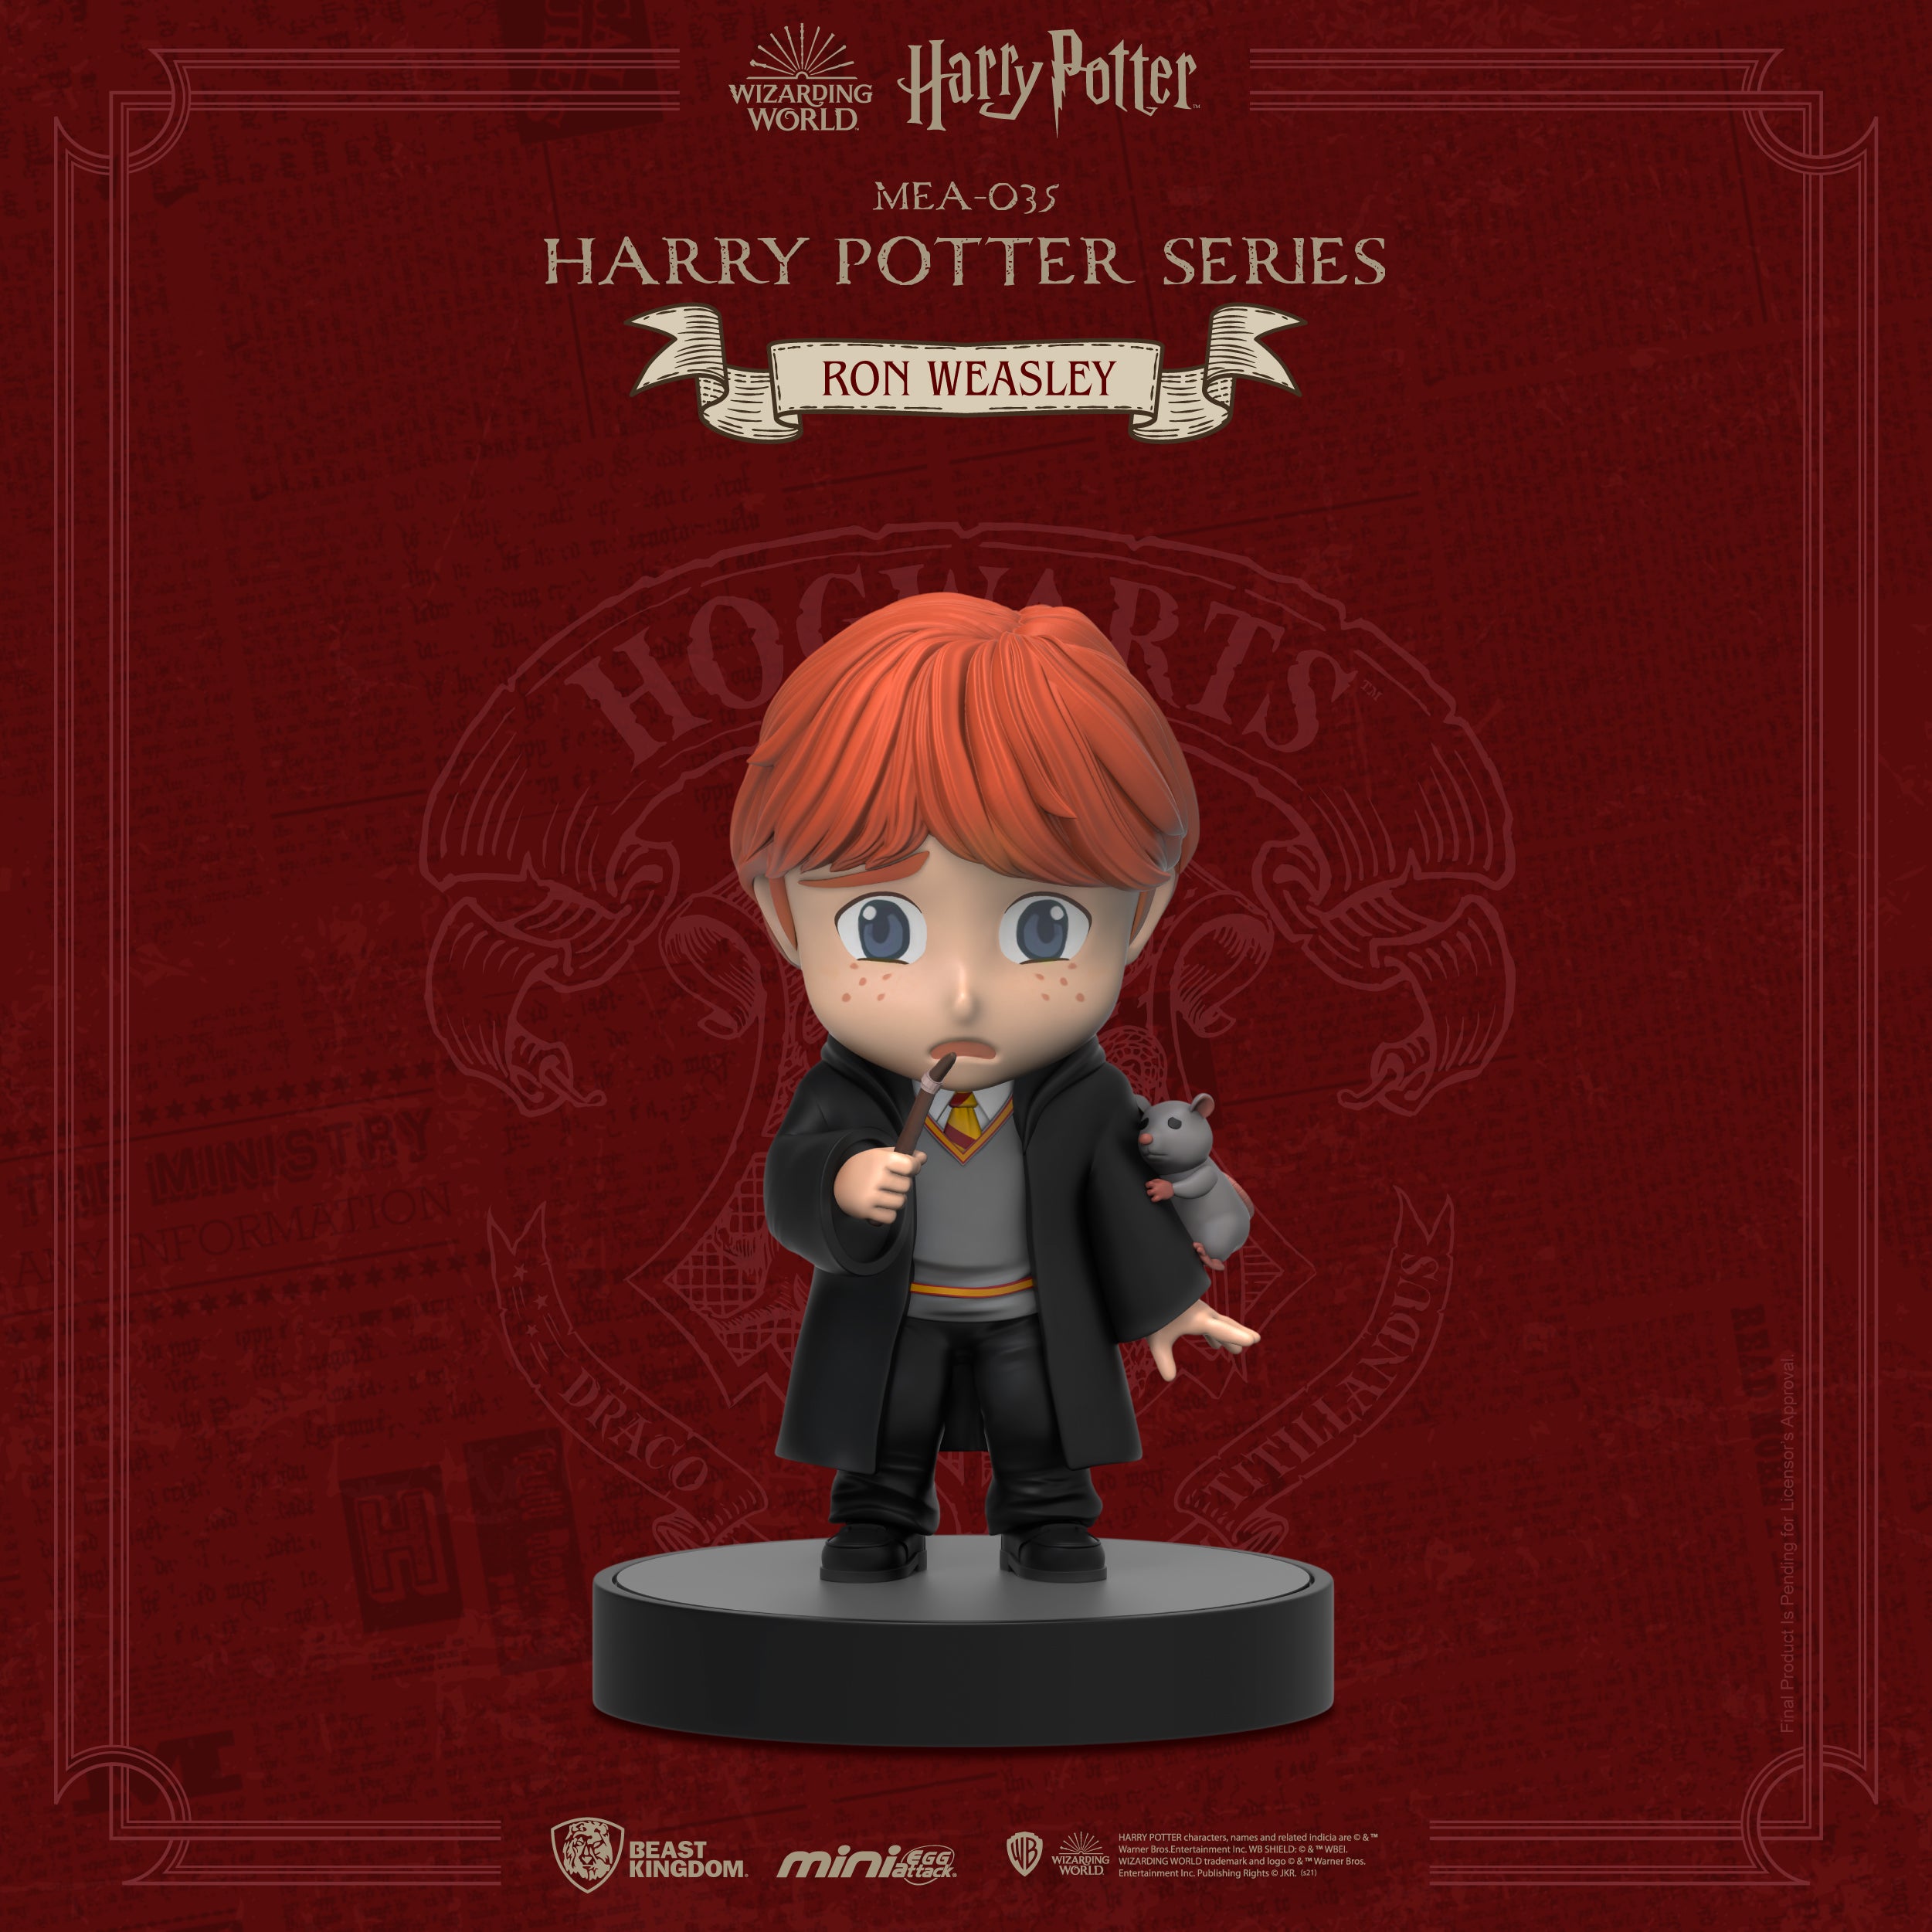 [LIMITED 2,000 PIECES] Beast Kingdom MEA-035 Harry Potter Series: Harry Potter Set 8-in-1 Bundle Collection Mini Egg Attack Figure Statues